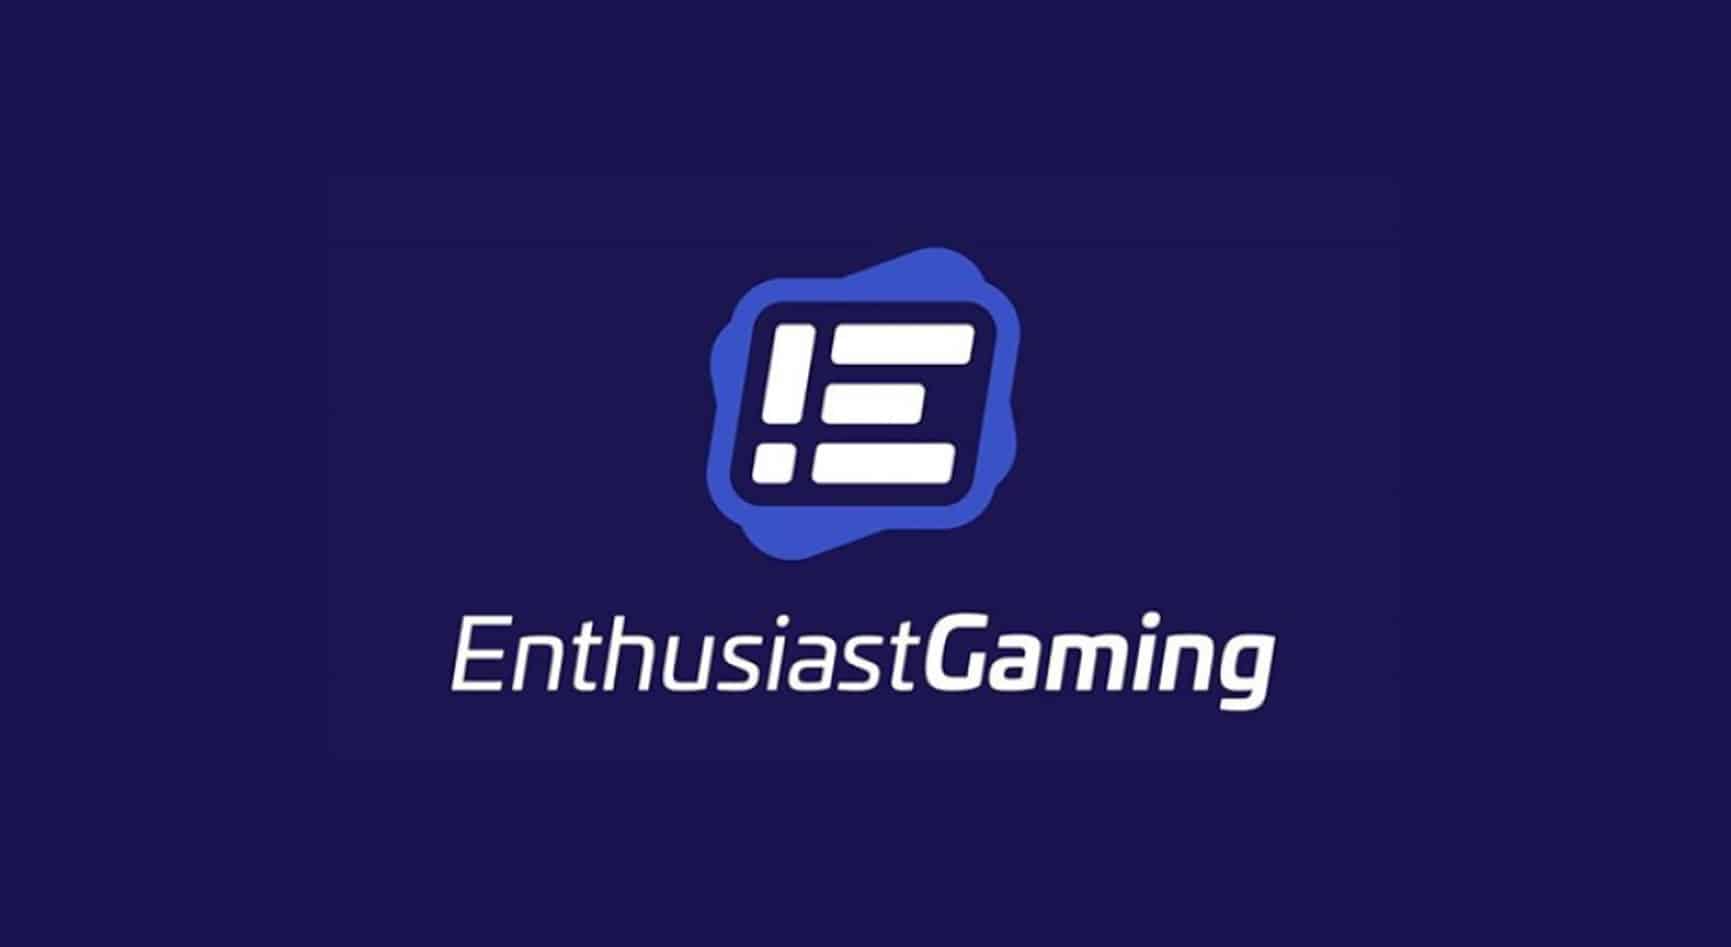 EnthusiastGaming